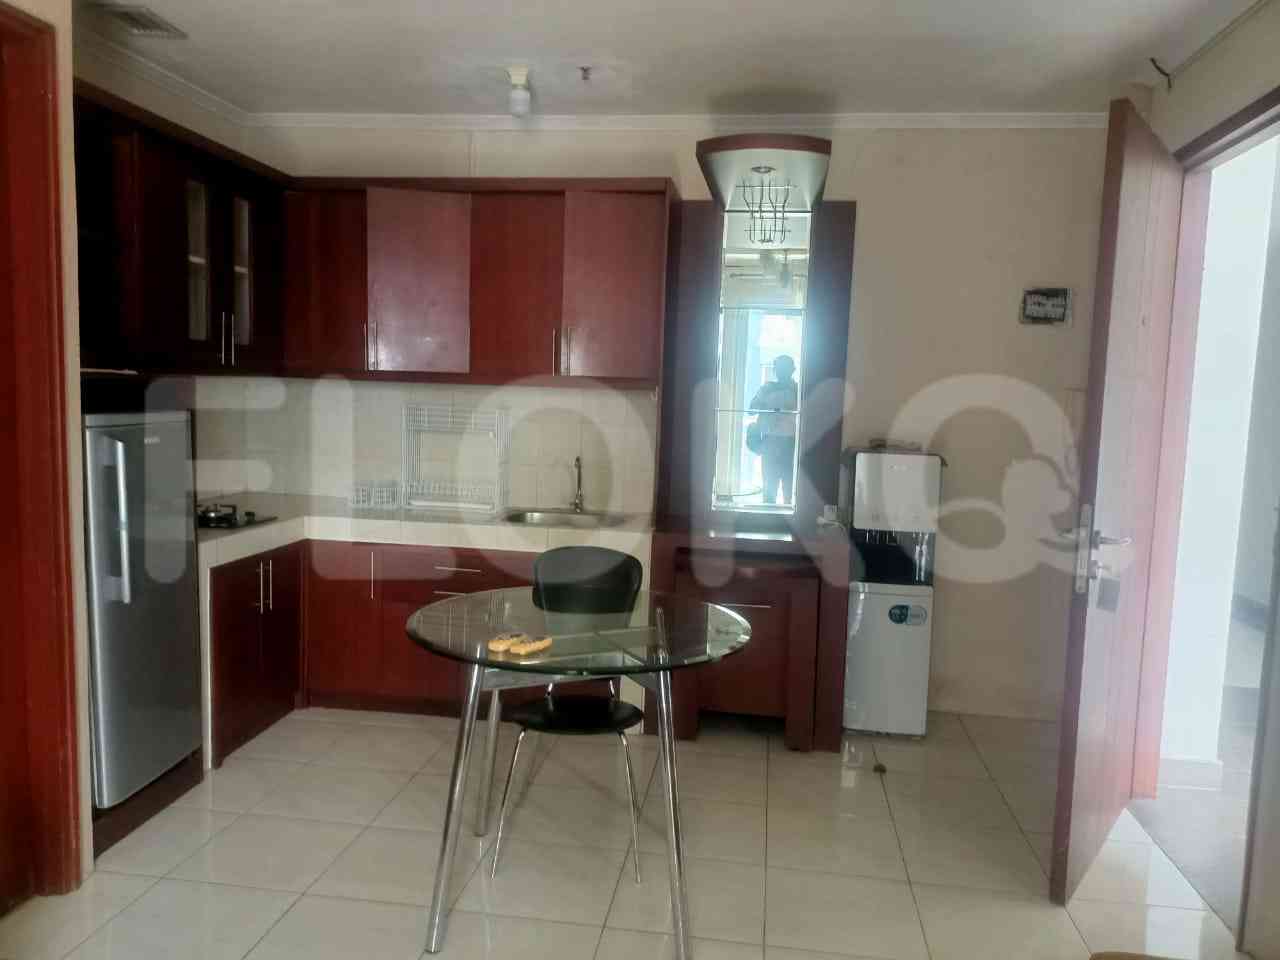 1 Bedroom on 42nd Floor for Rent in Sudirman Park Apartment - ftab11 2